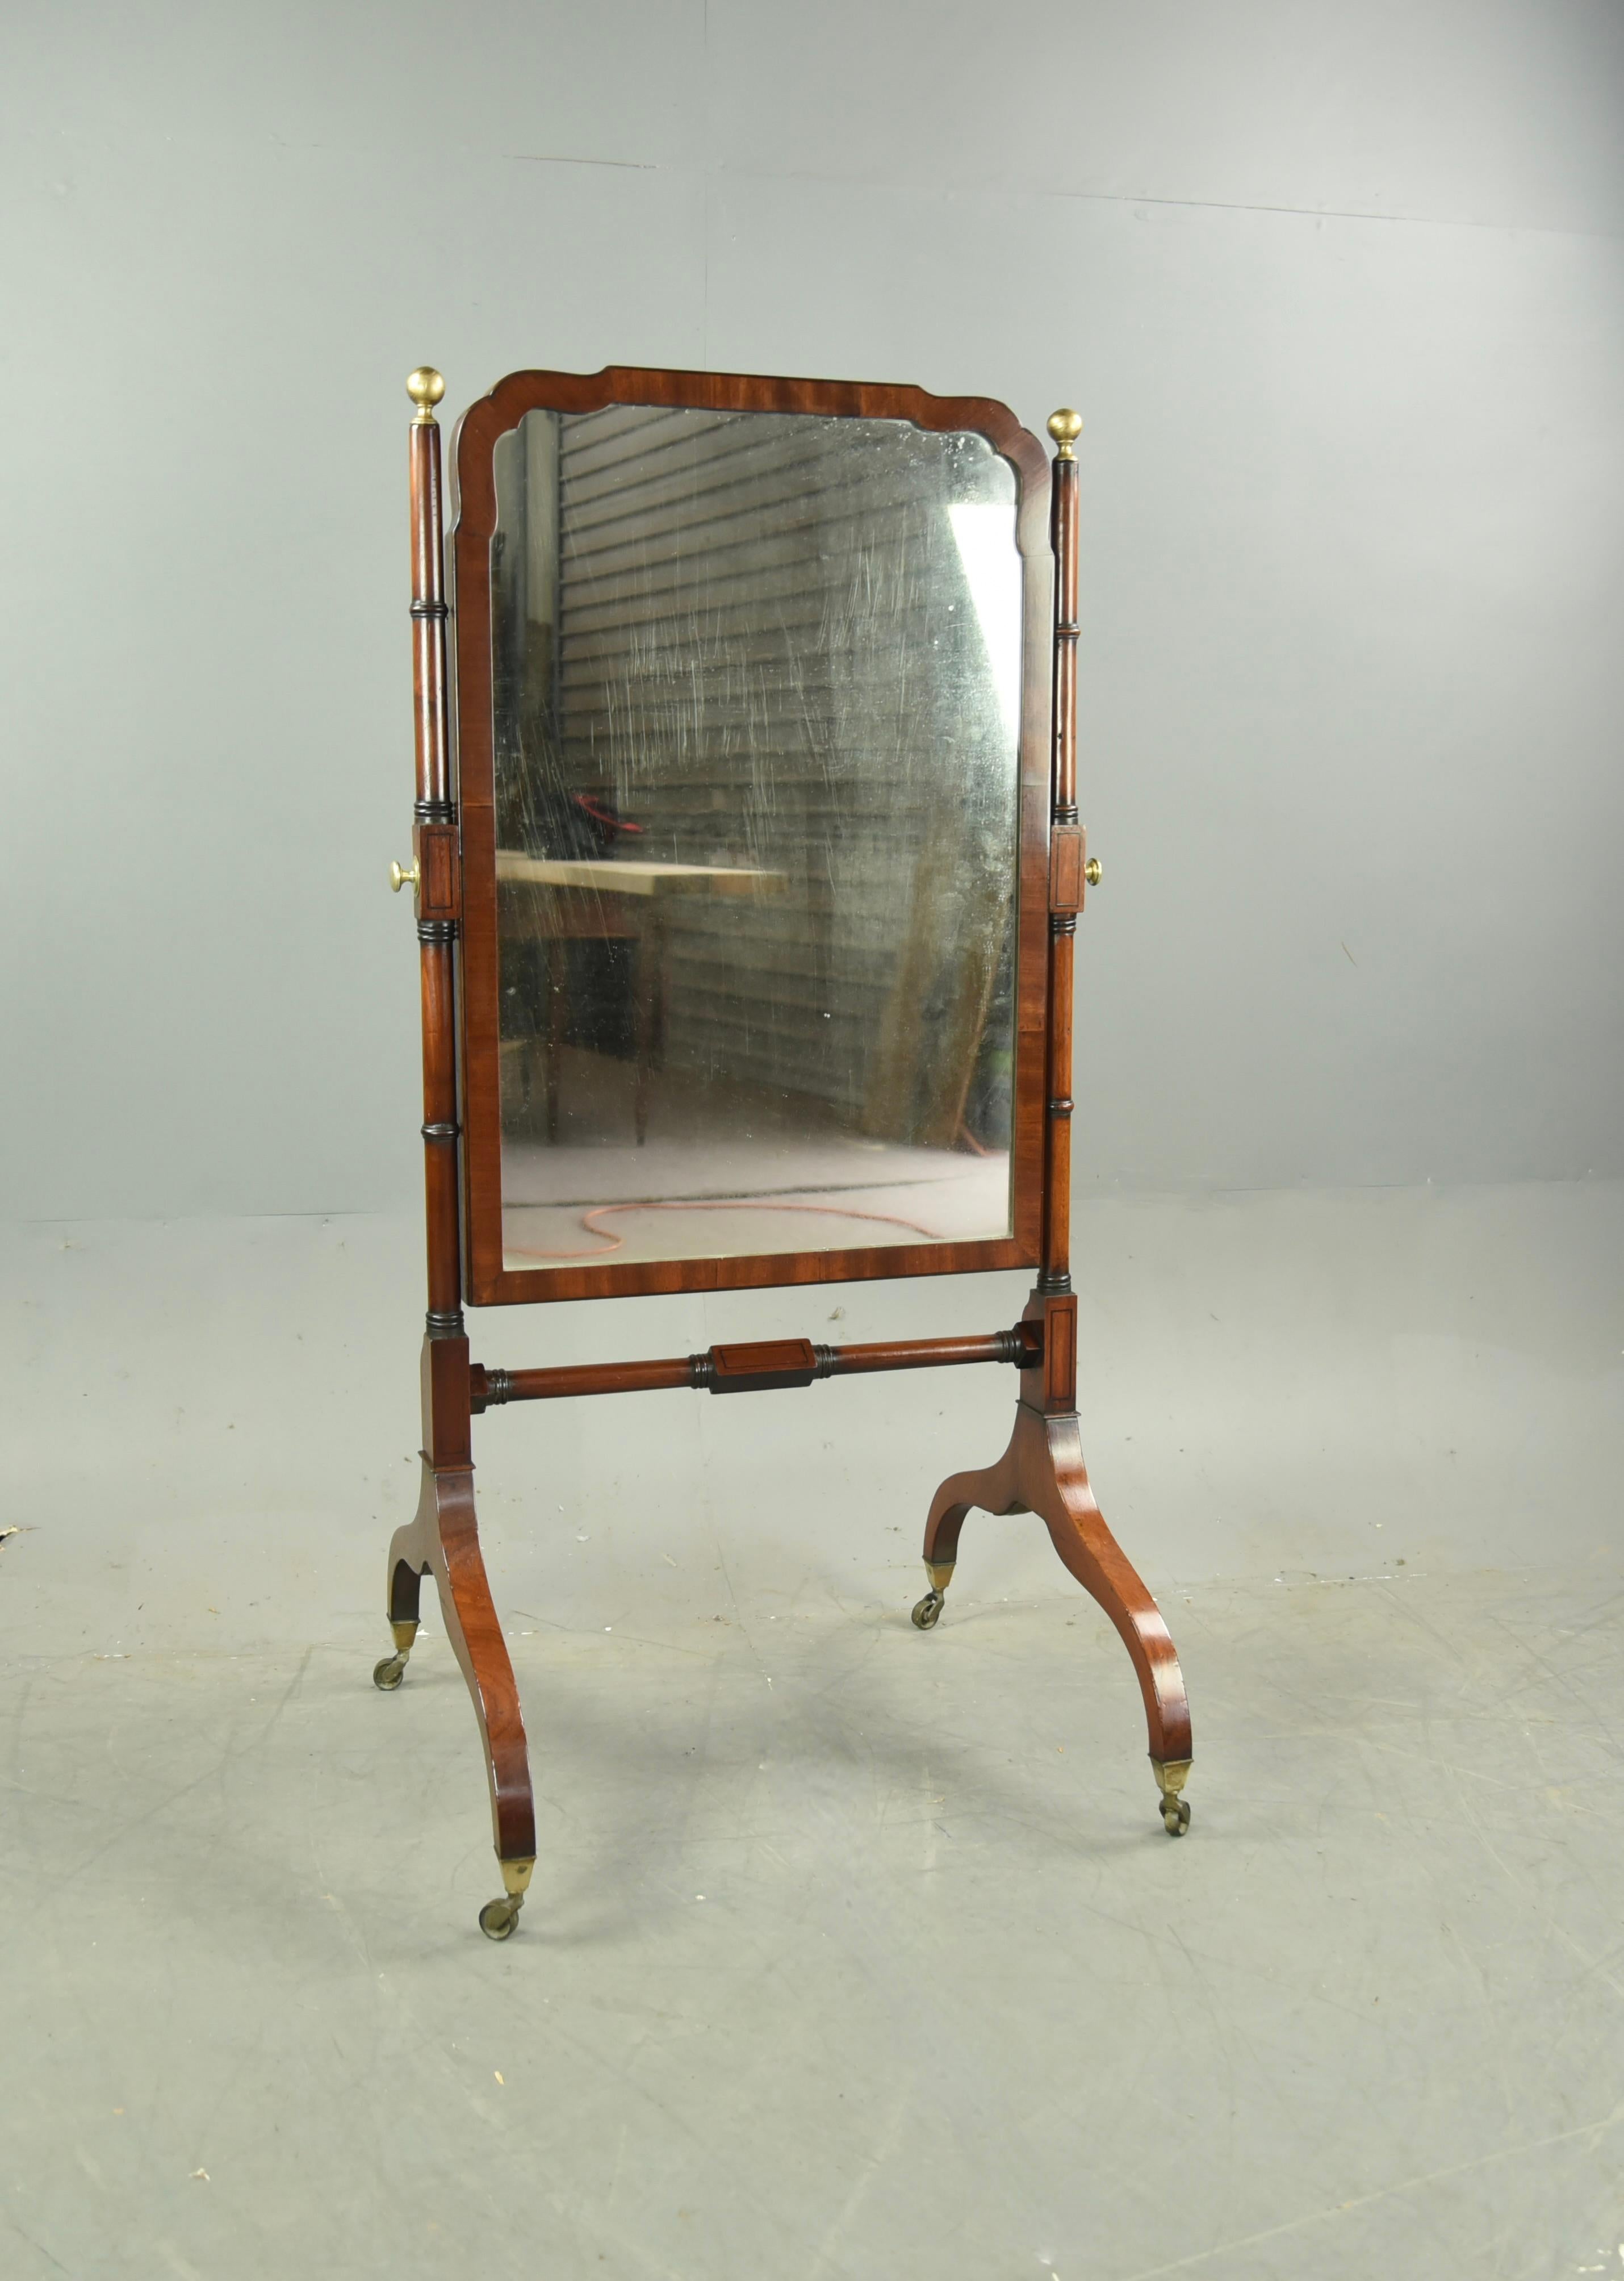 The frame is in great condition a great colour and stands very elegantly typical of the Regency period 
It stands on original brass castors , 
The original mirror plate does have some light fogging but still gives good reflection and gives it